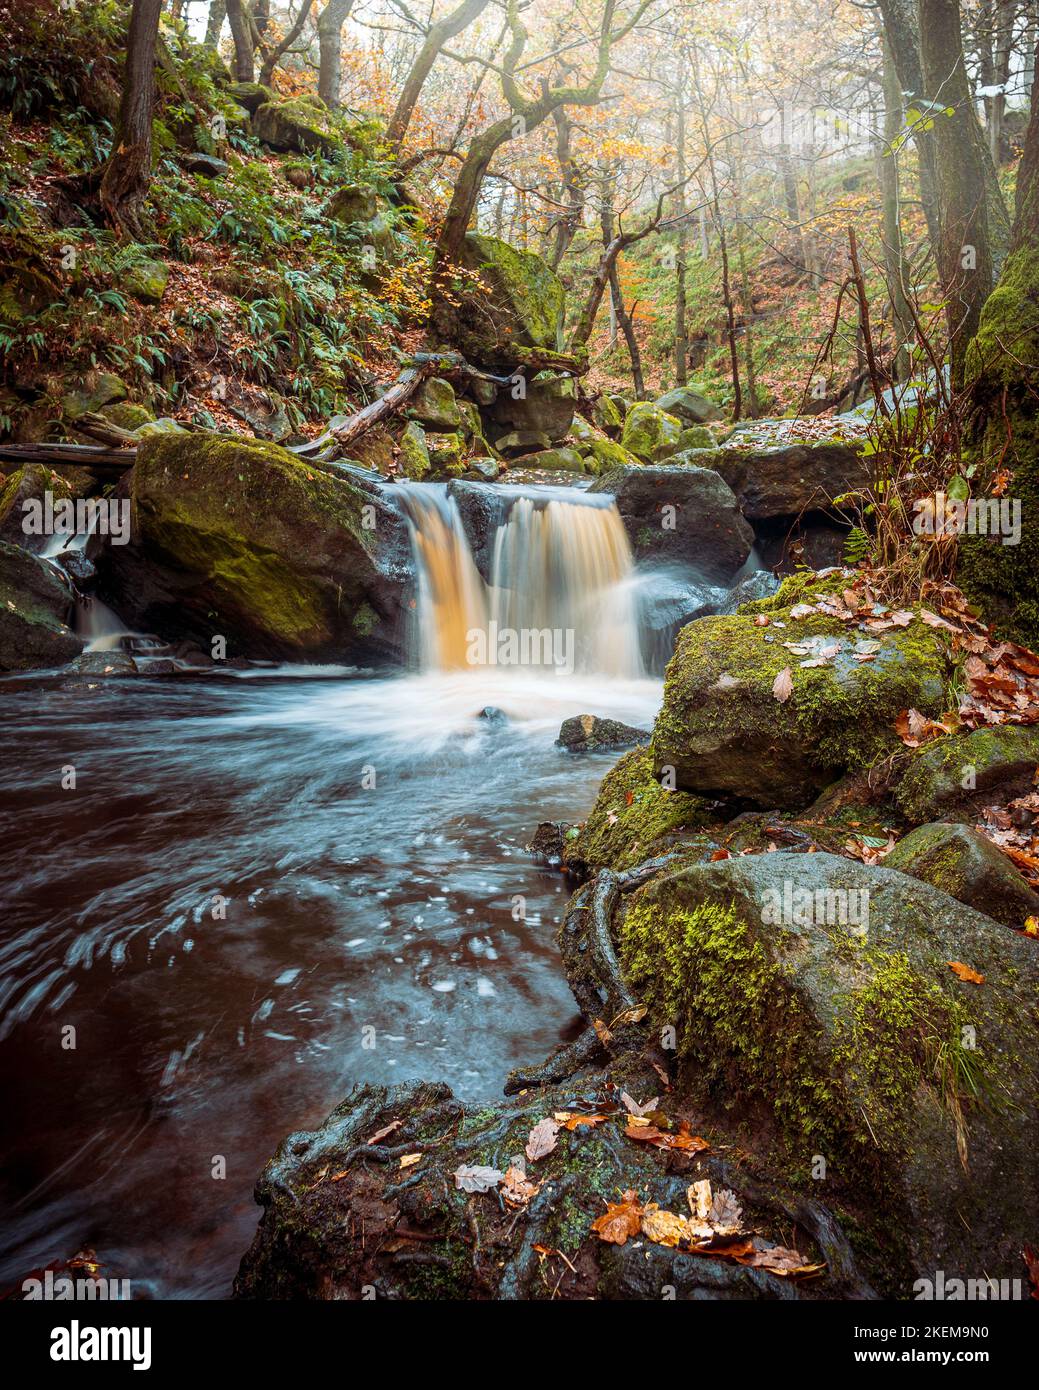 A waterfall in Padley Gorge, taken on a misty autumn morning. Stock Photo